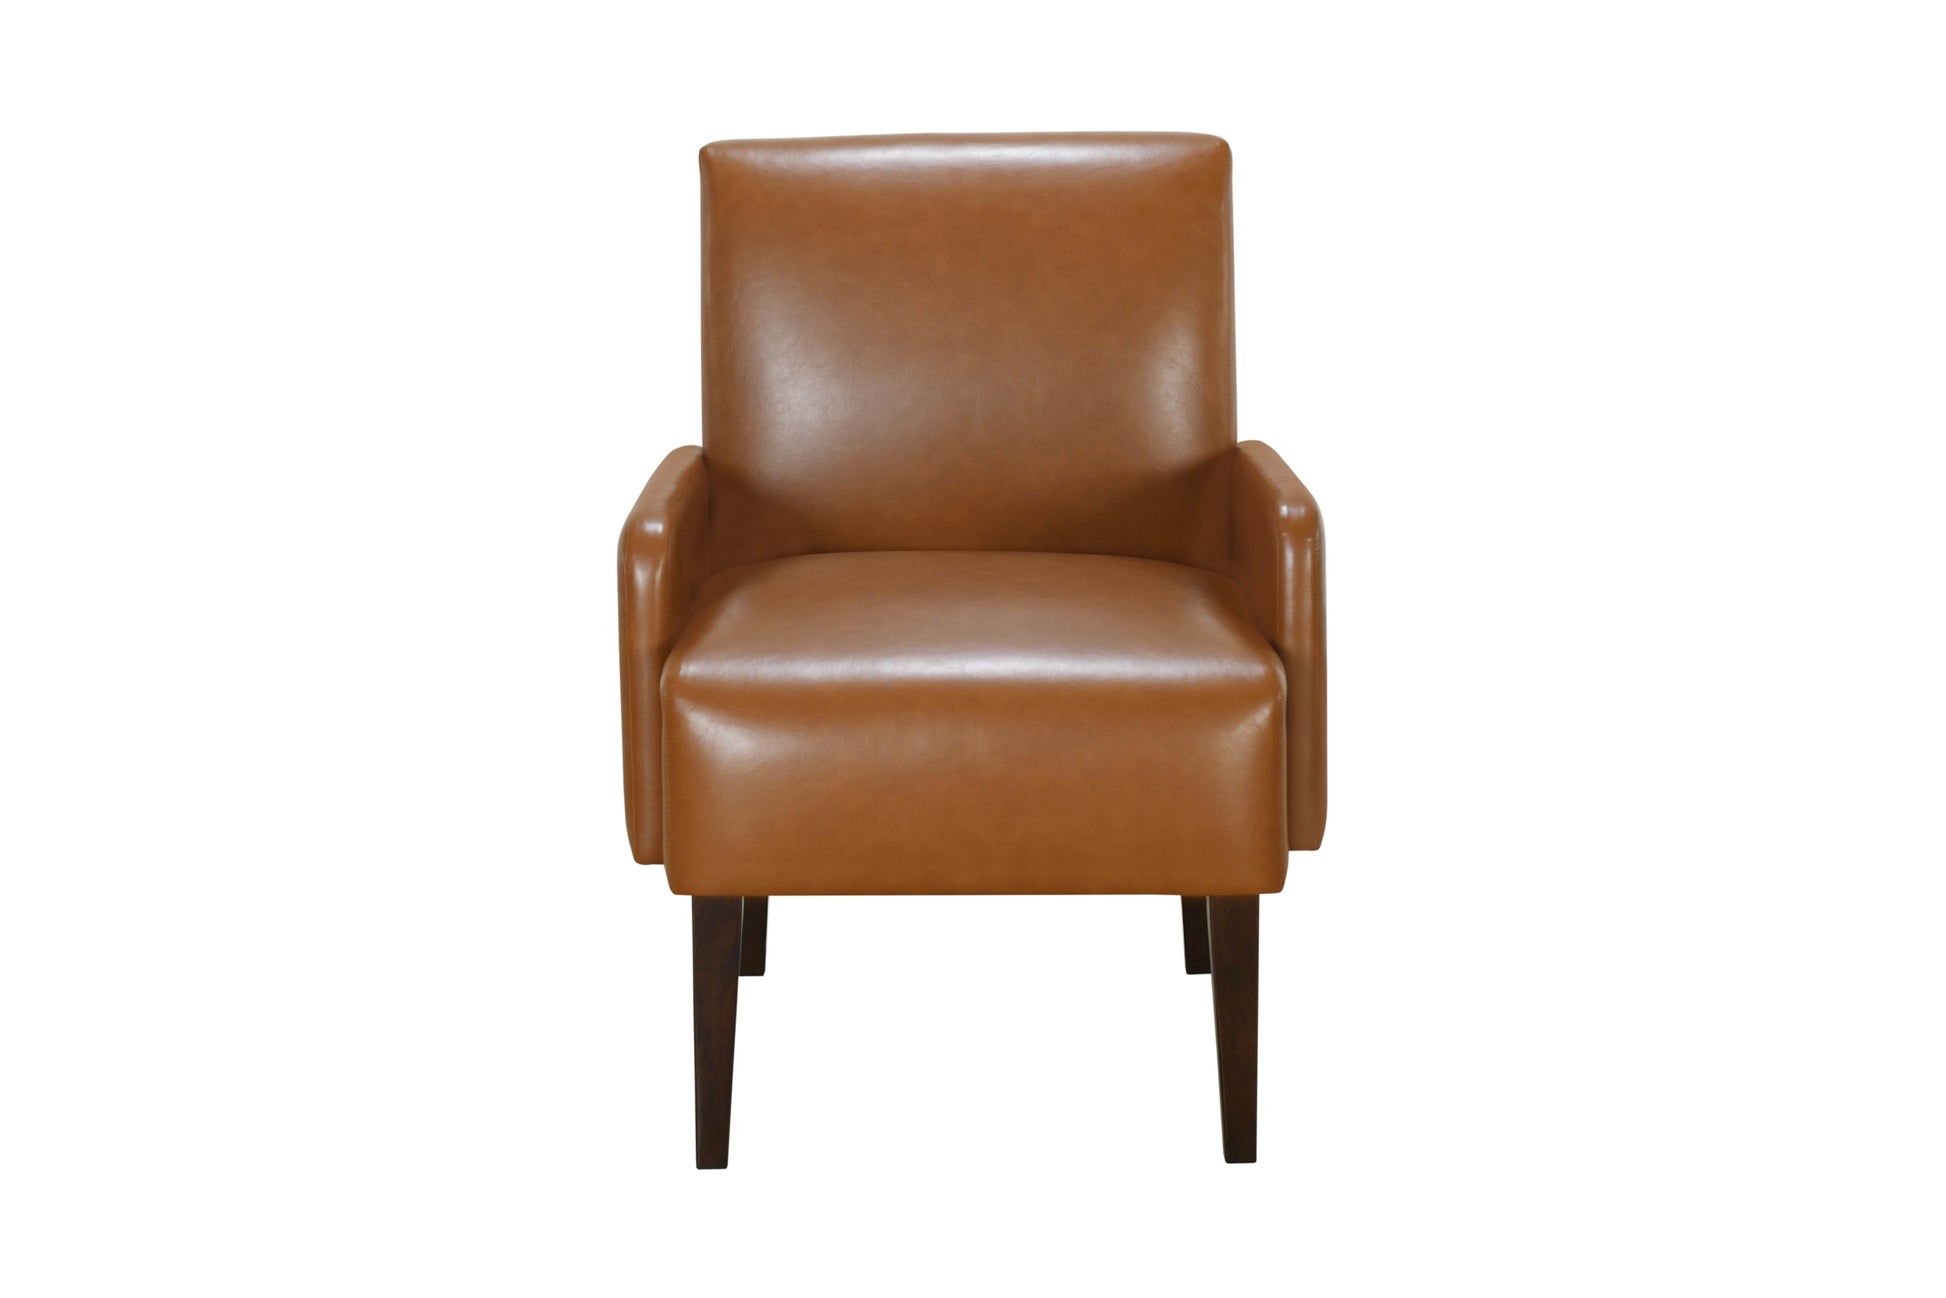 Luxurious Living Room Furniture Accent Chair with